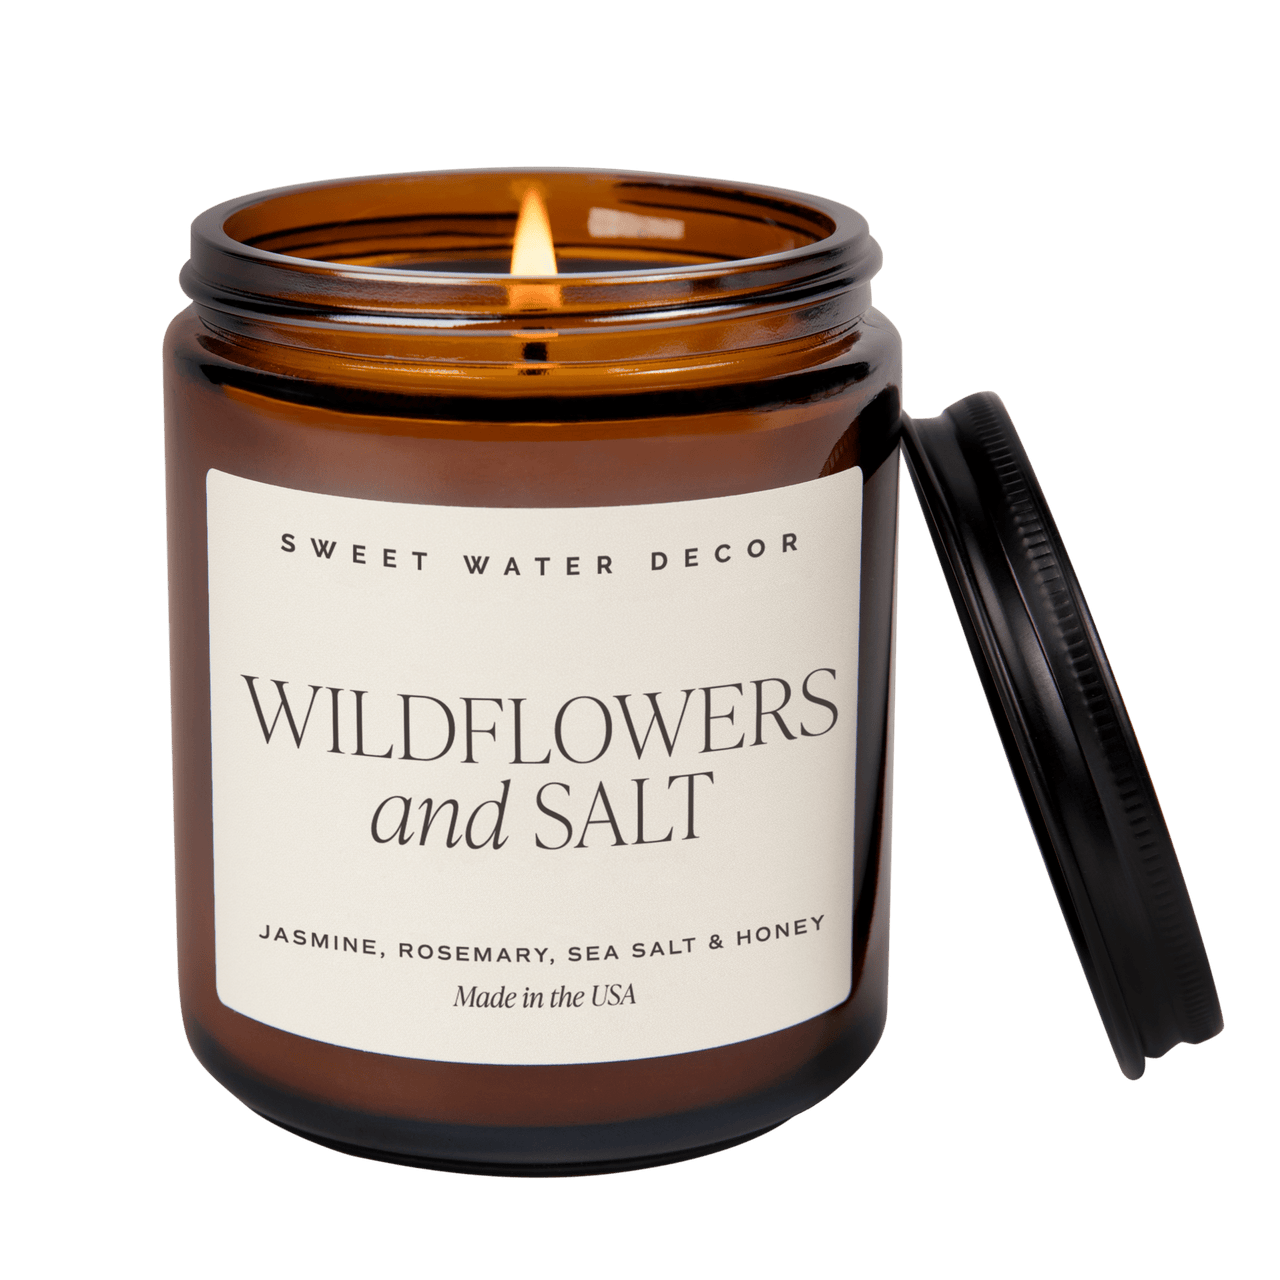 Wildflowers and Salt Soy Candle - Amber Jar - 9 oz - Tony's Home Furnishings